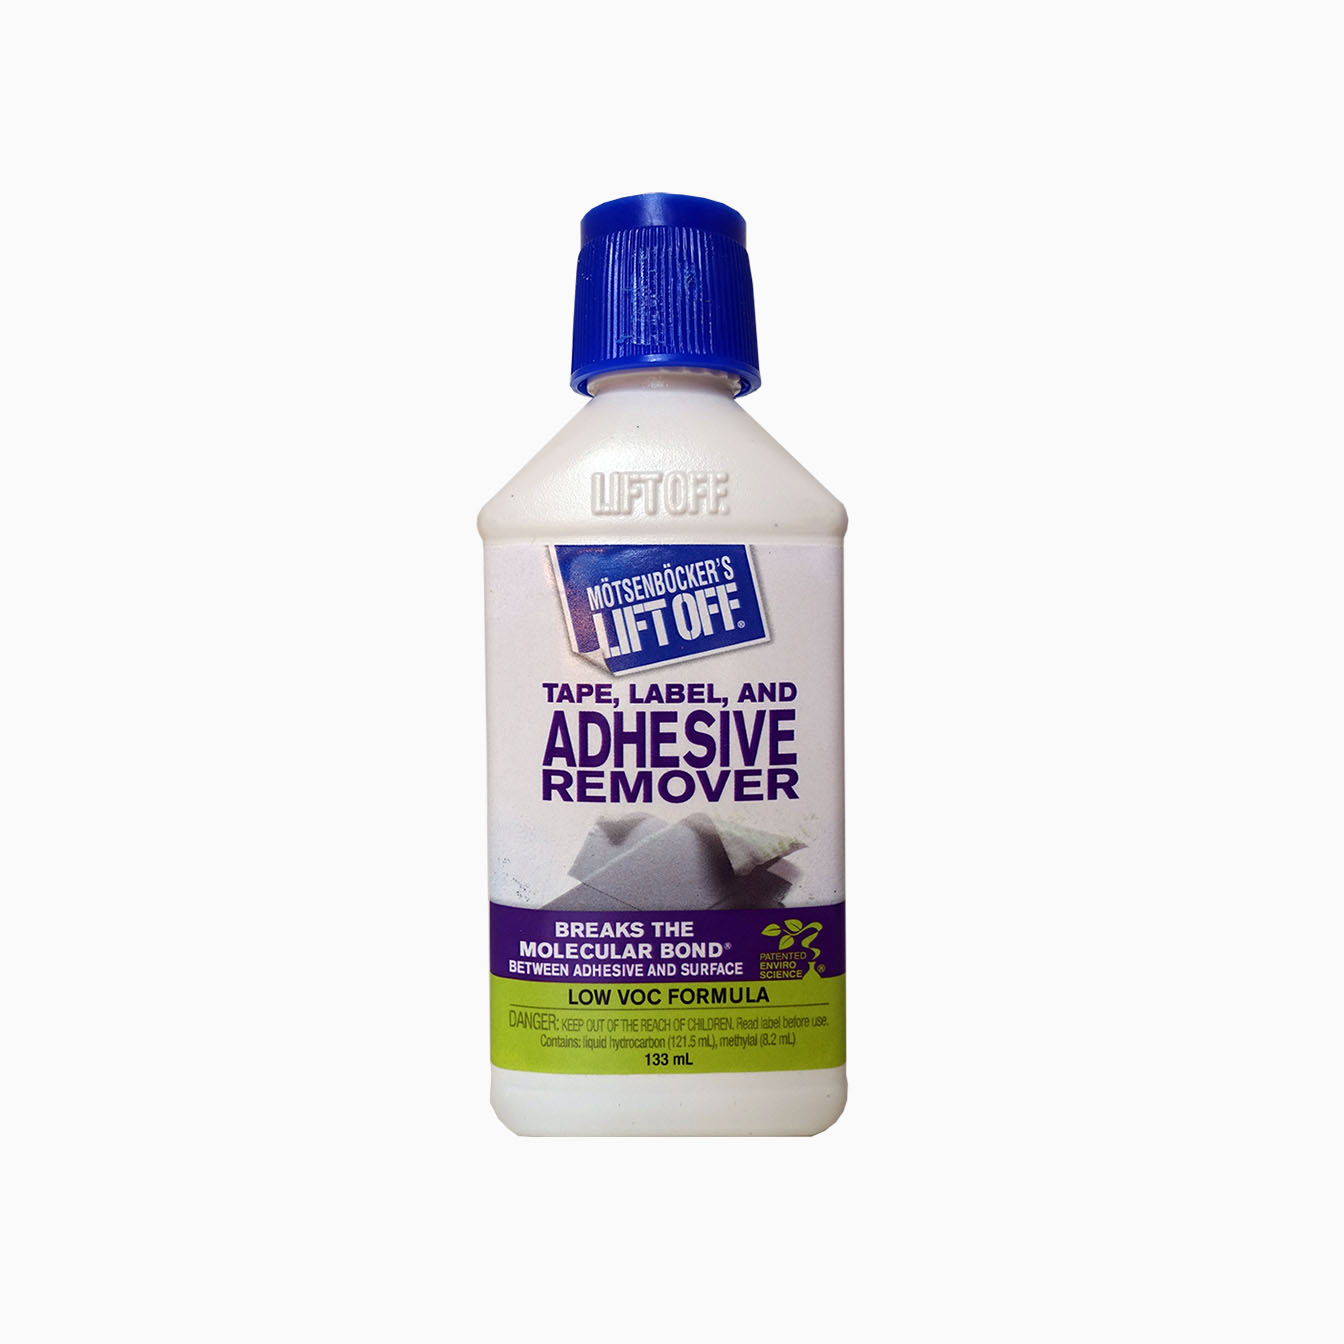 https://www.norglass.com.au/storage/products/53/222/Adhesive-remover-2.jpg